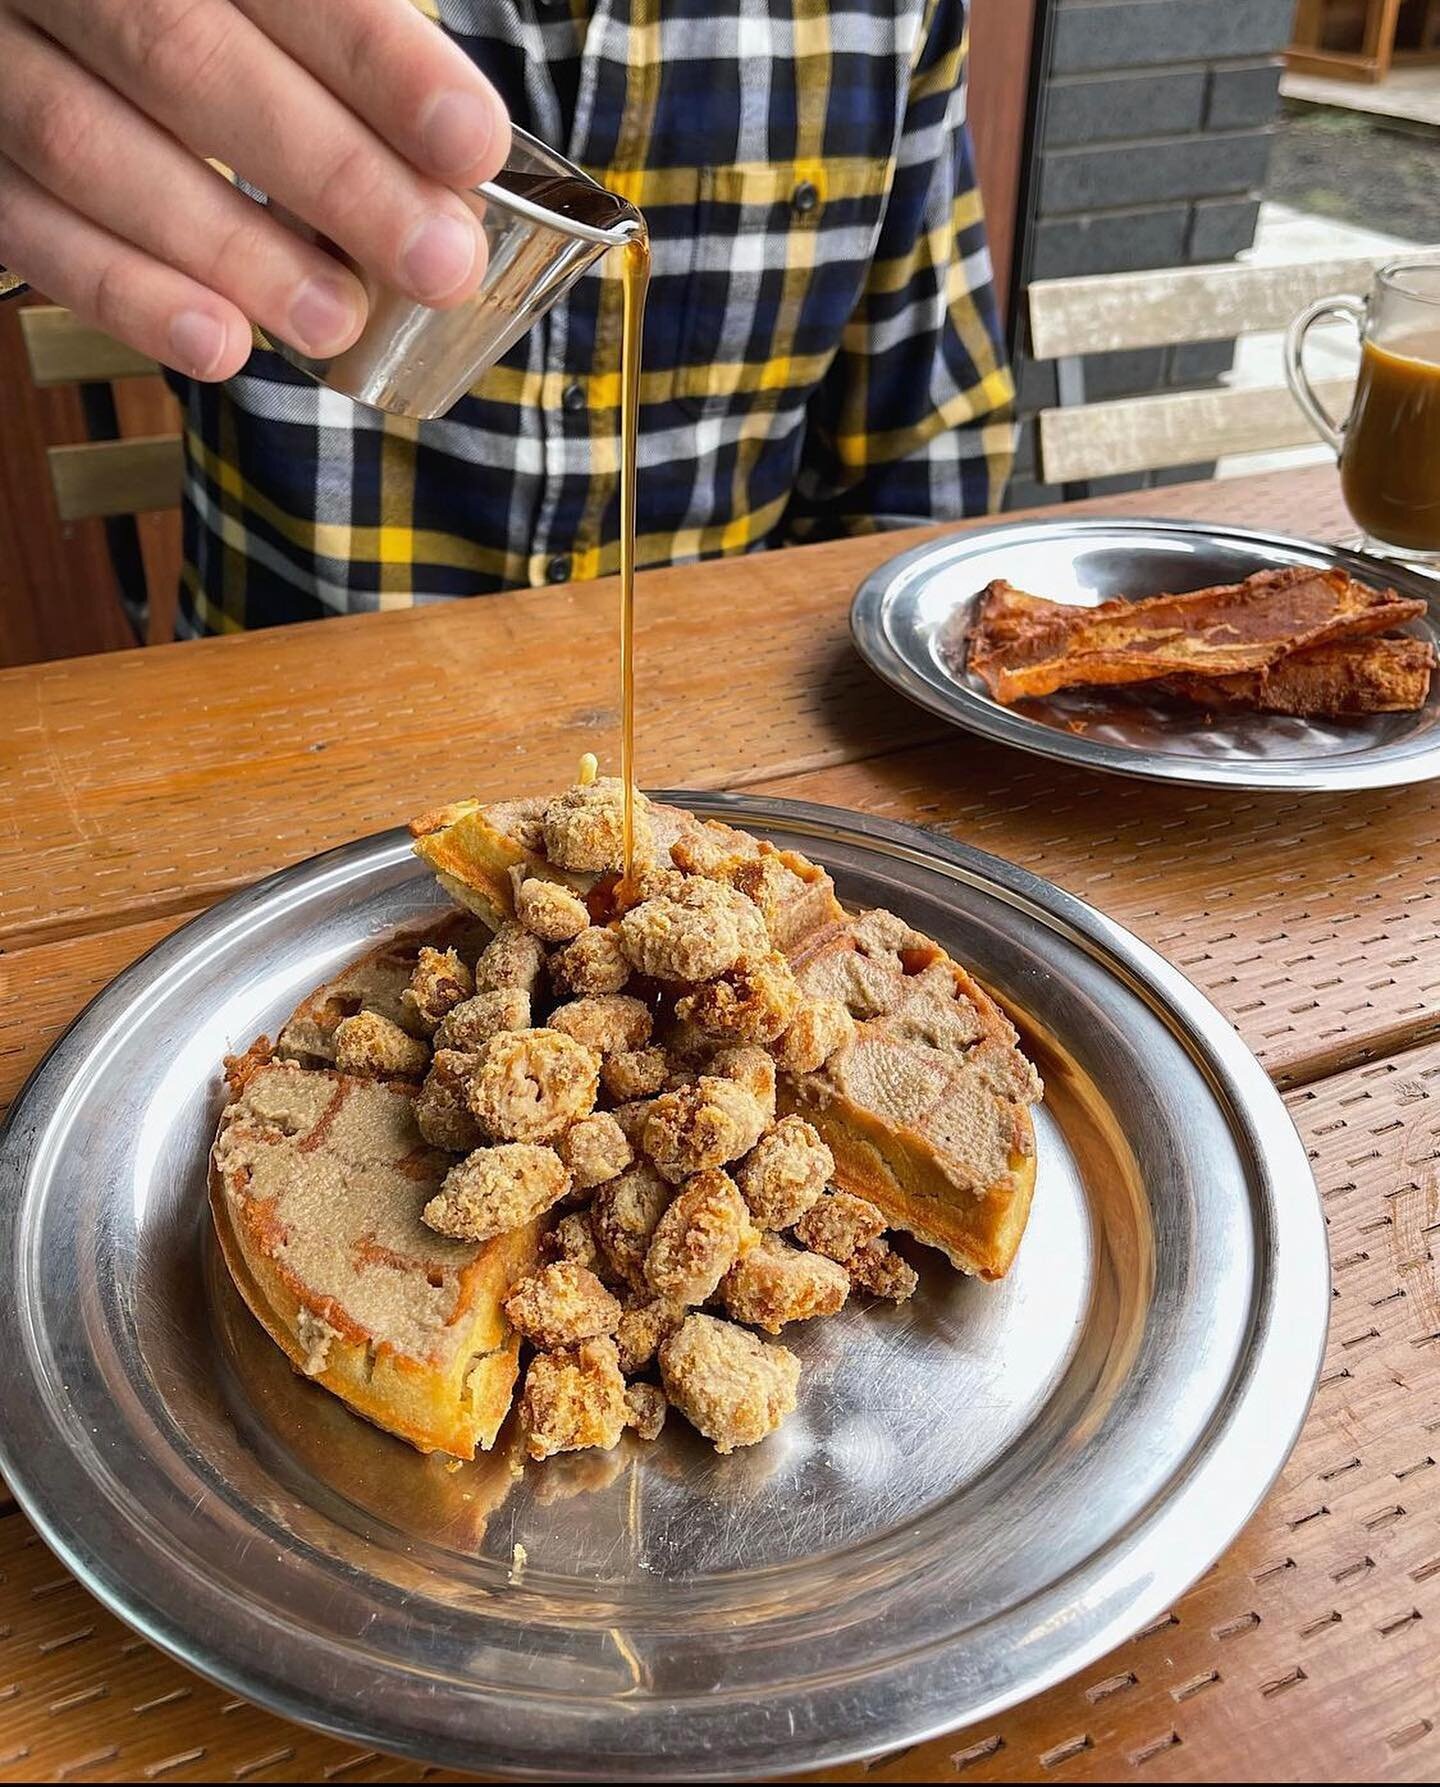 @michelevenlee making our Soy 'Chicken' and Waffles (GF) look goooooooood 😋🔥 Swipe to see what else Michele ordered for brunch! Our brunch menu is served EVERY DAY at The Sudra Mississippi from 10 am-2 pm 💕 #thesudrapdx